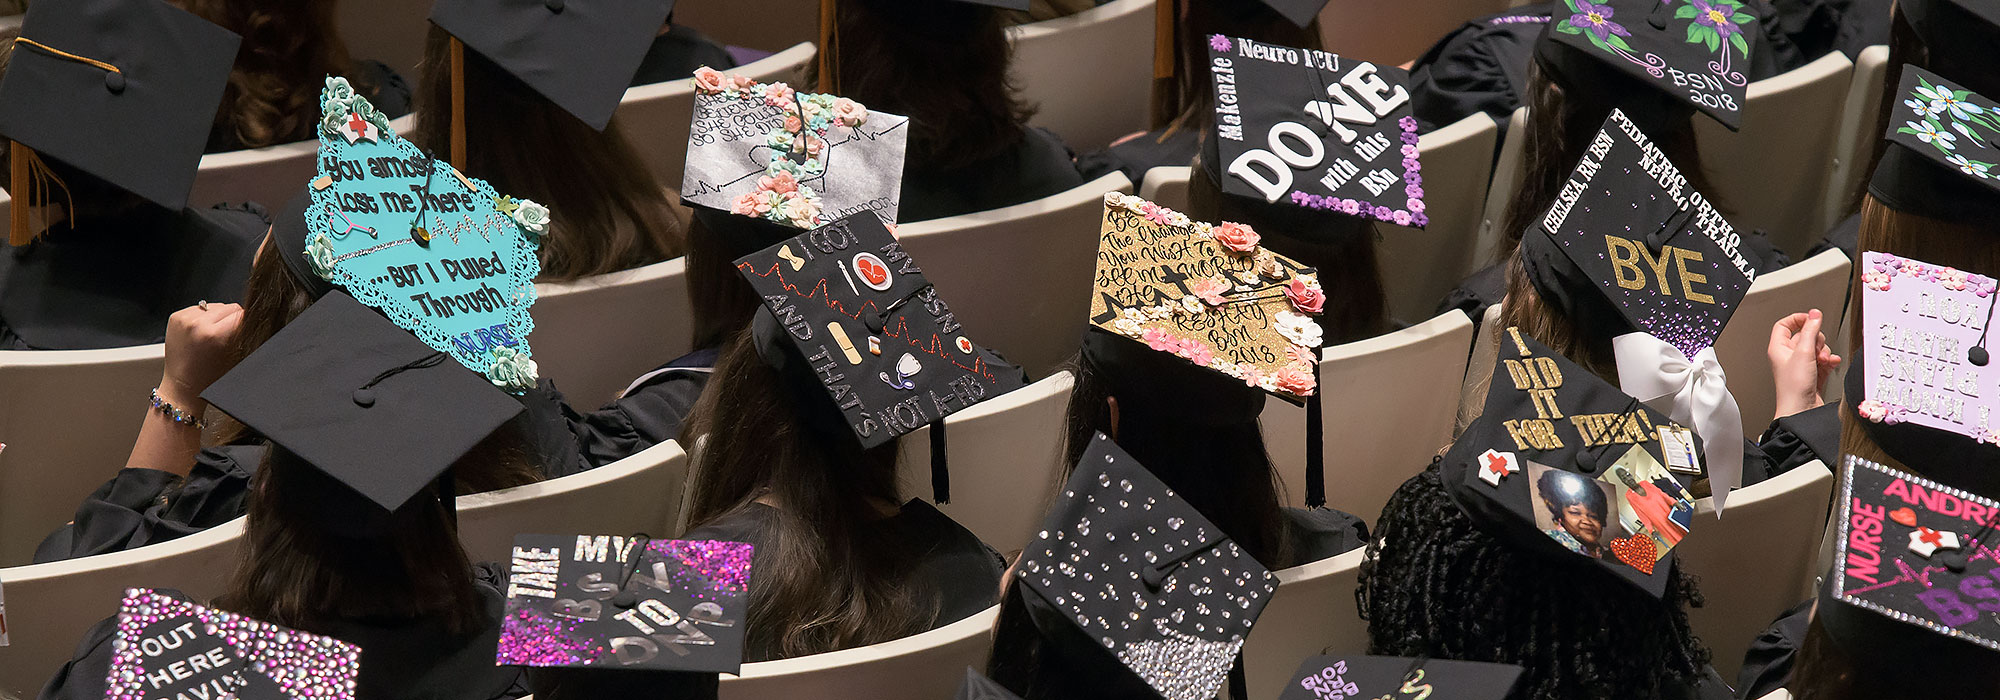 View from above shows graduation caps decorated with messages.